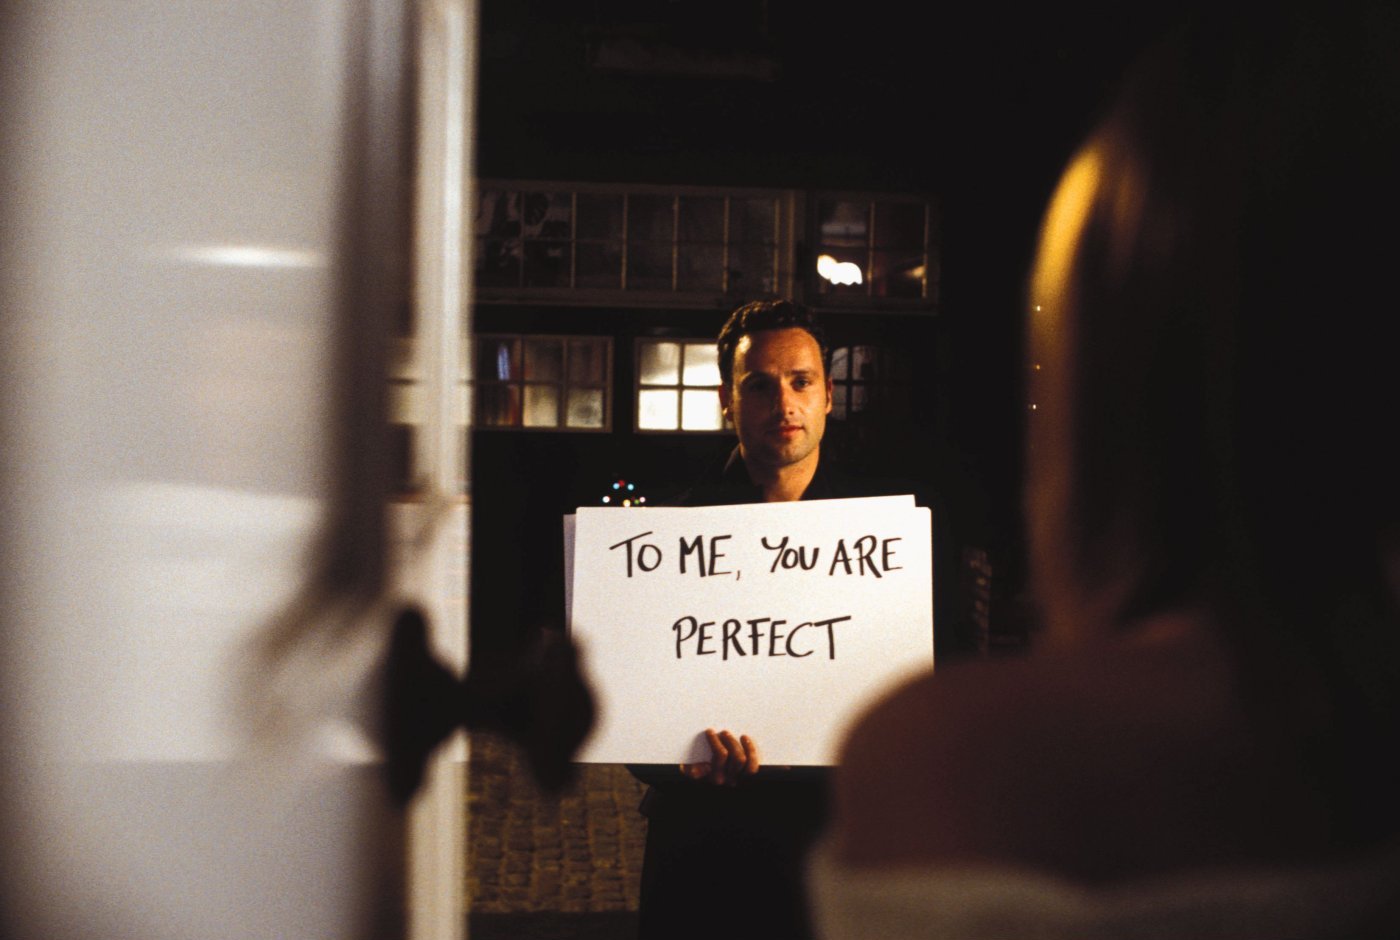 You are perfect - Love actually